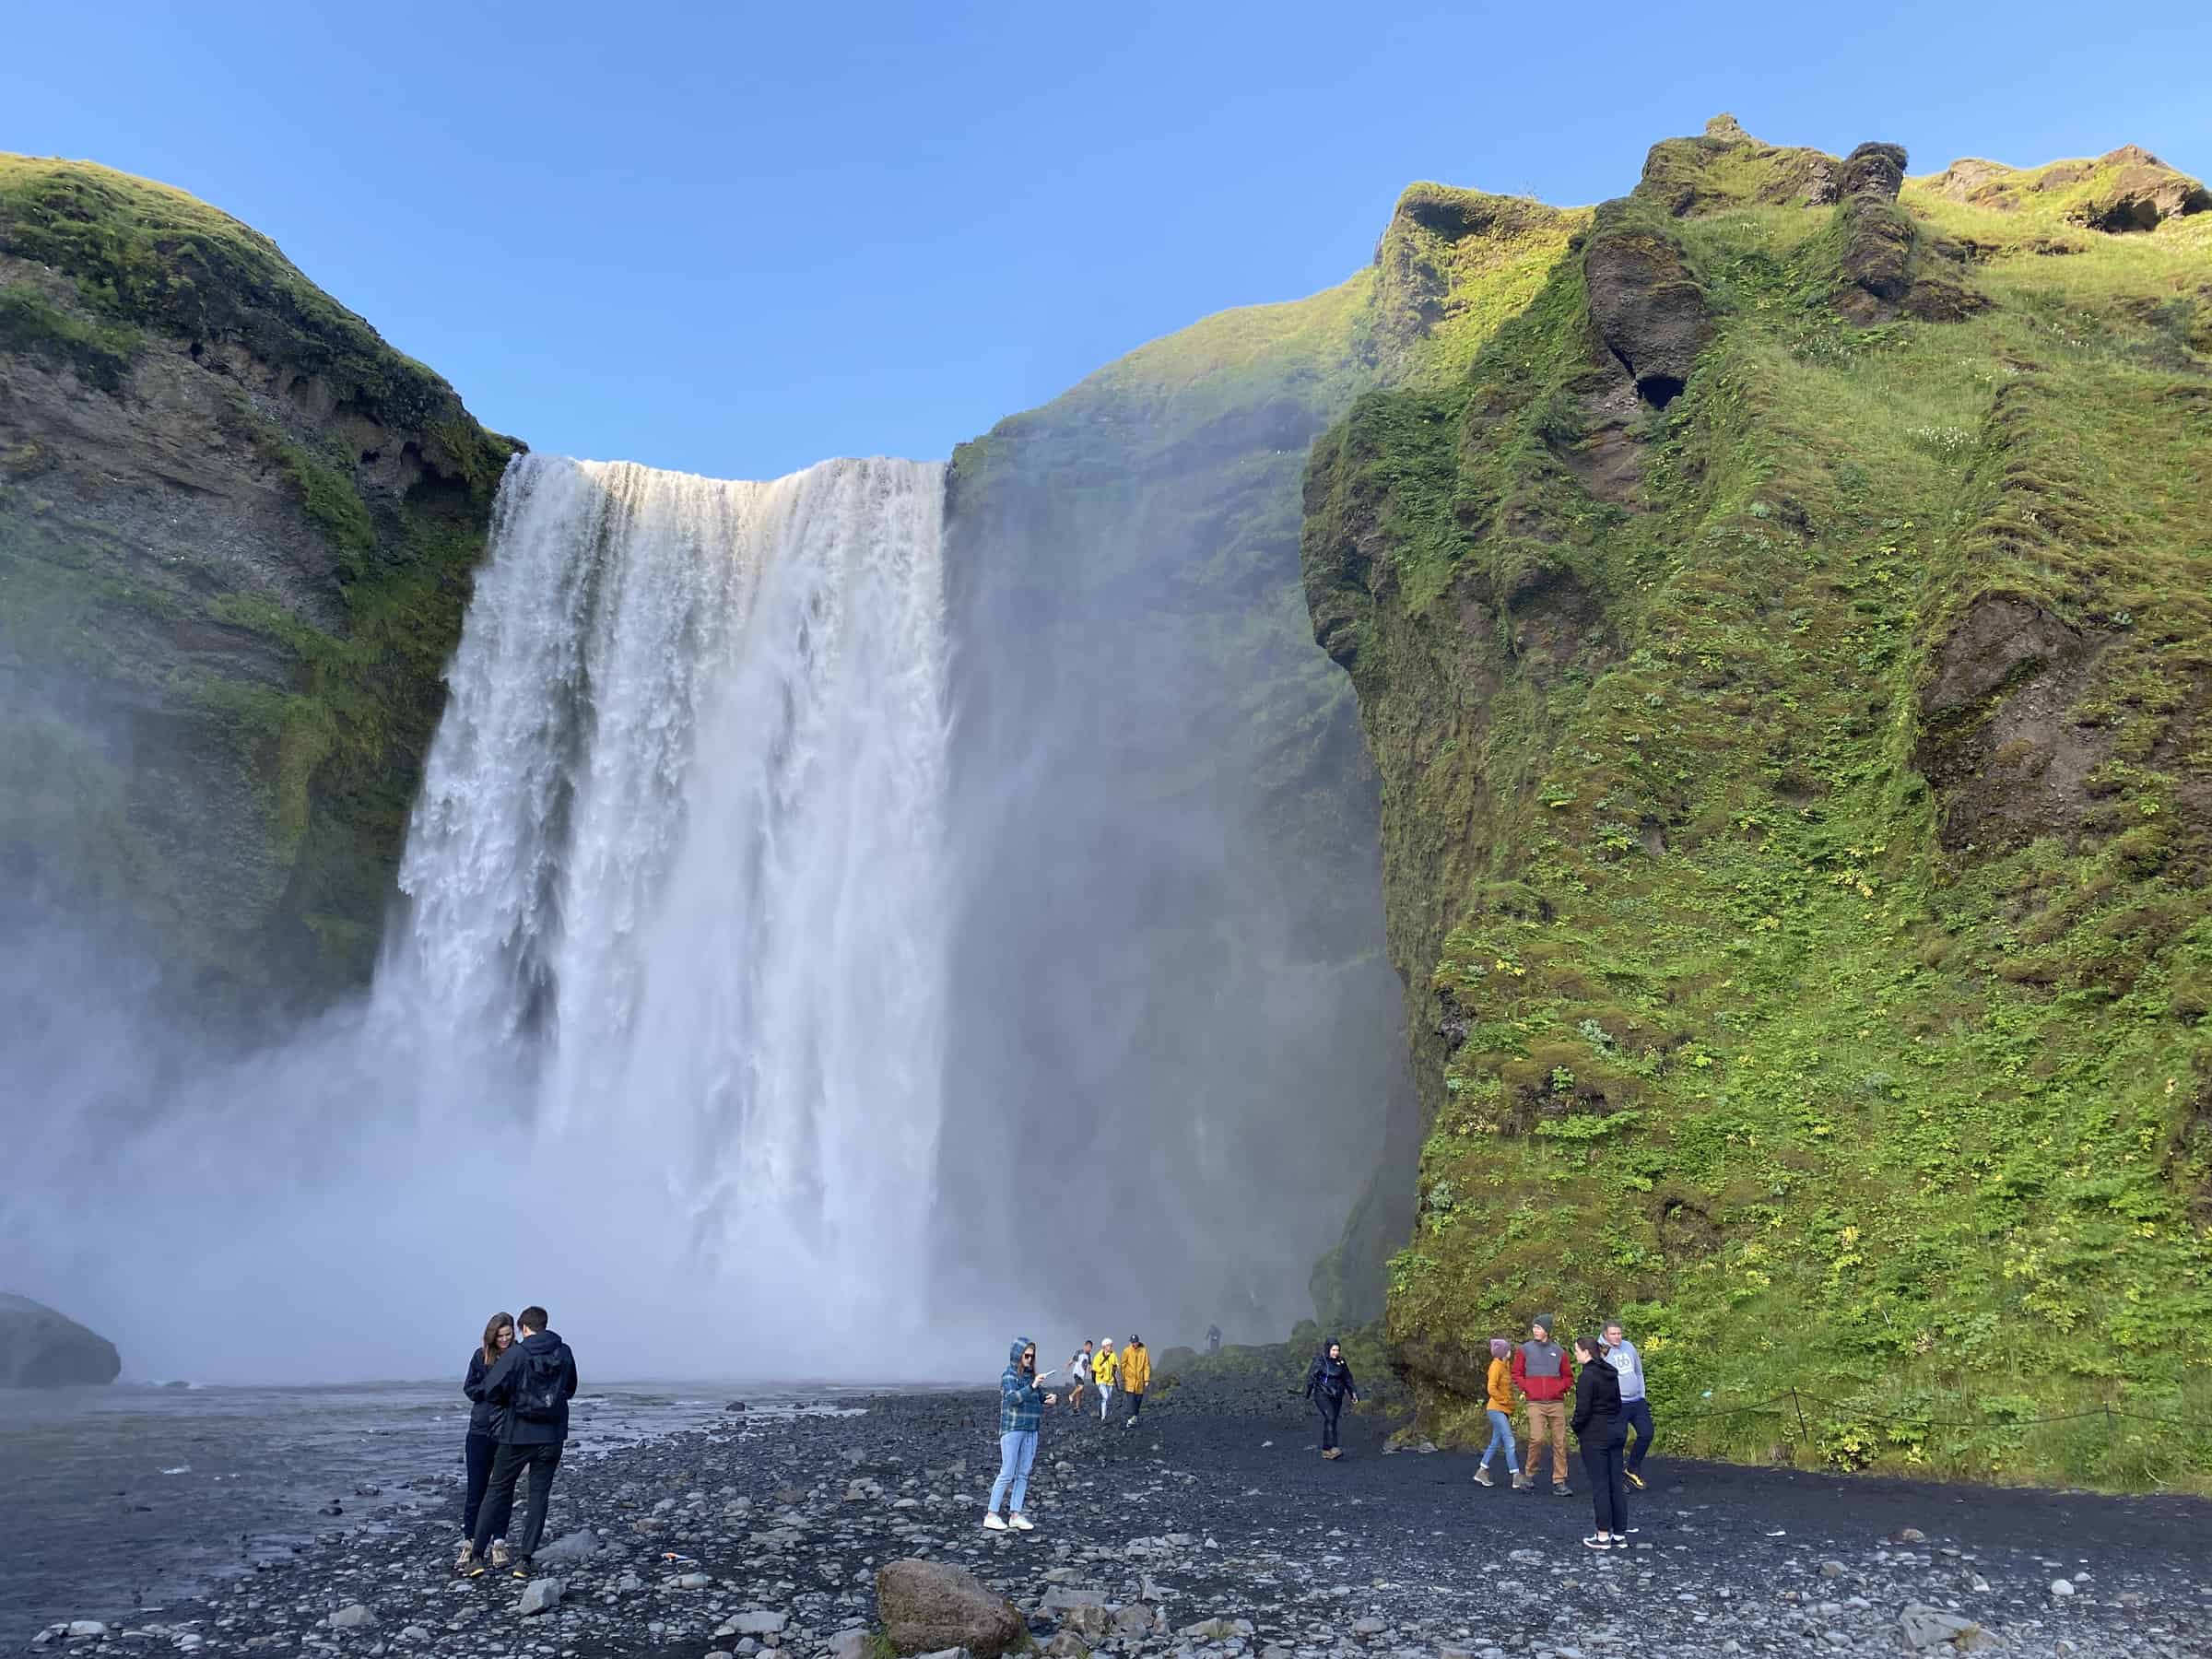 Tourists enjoying the magnificent Skógafoss waterfall in Iceland, with its powerful cascade plummeting down a green moss-covered cliff into a misty pool below, against a backdrop of a clear blue sky